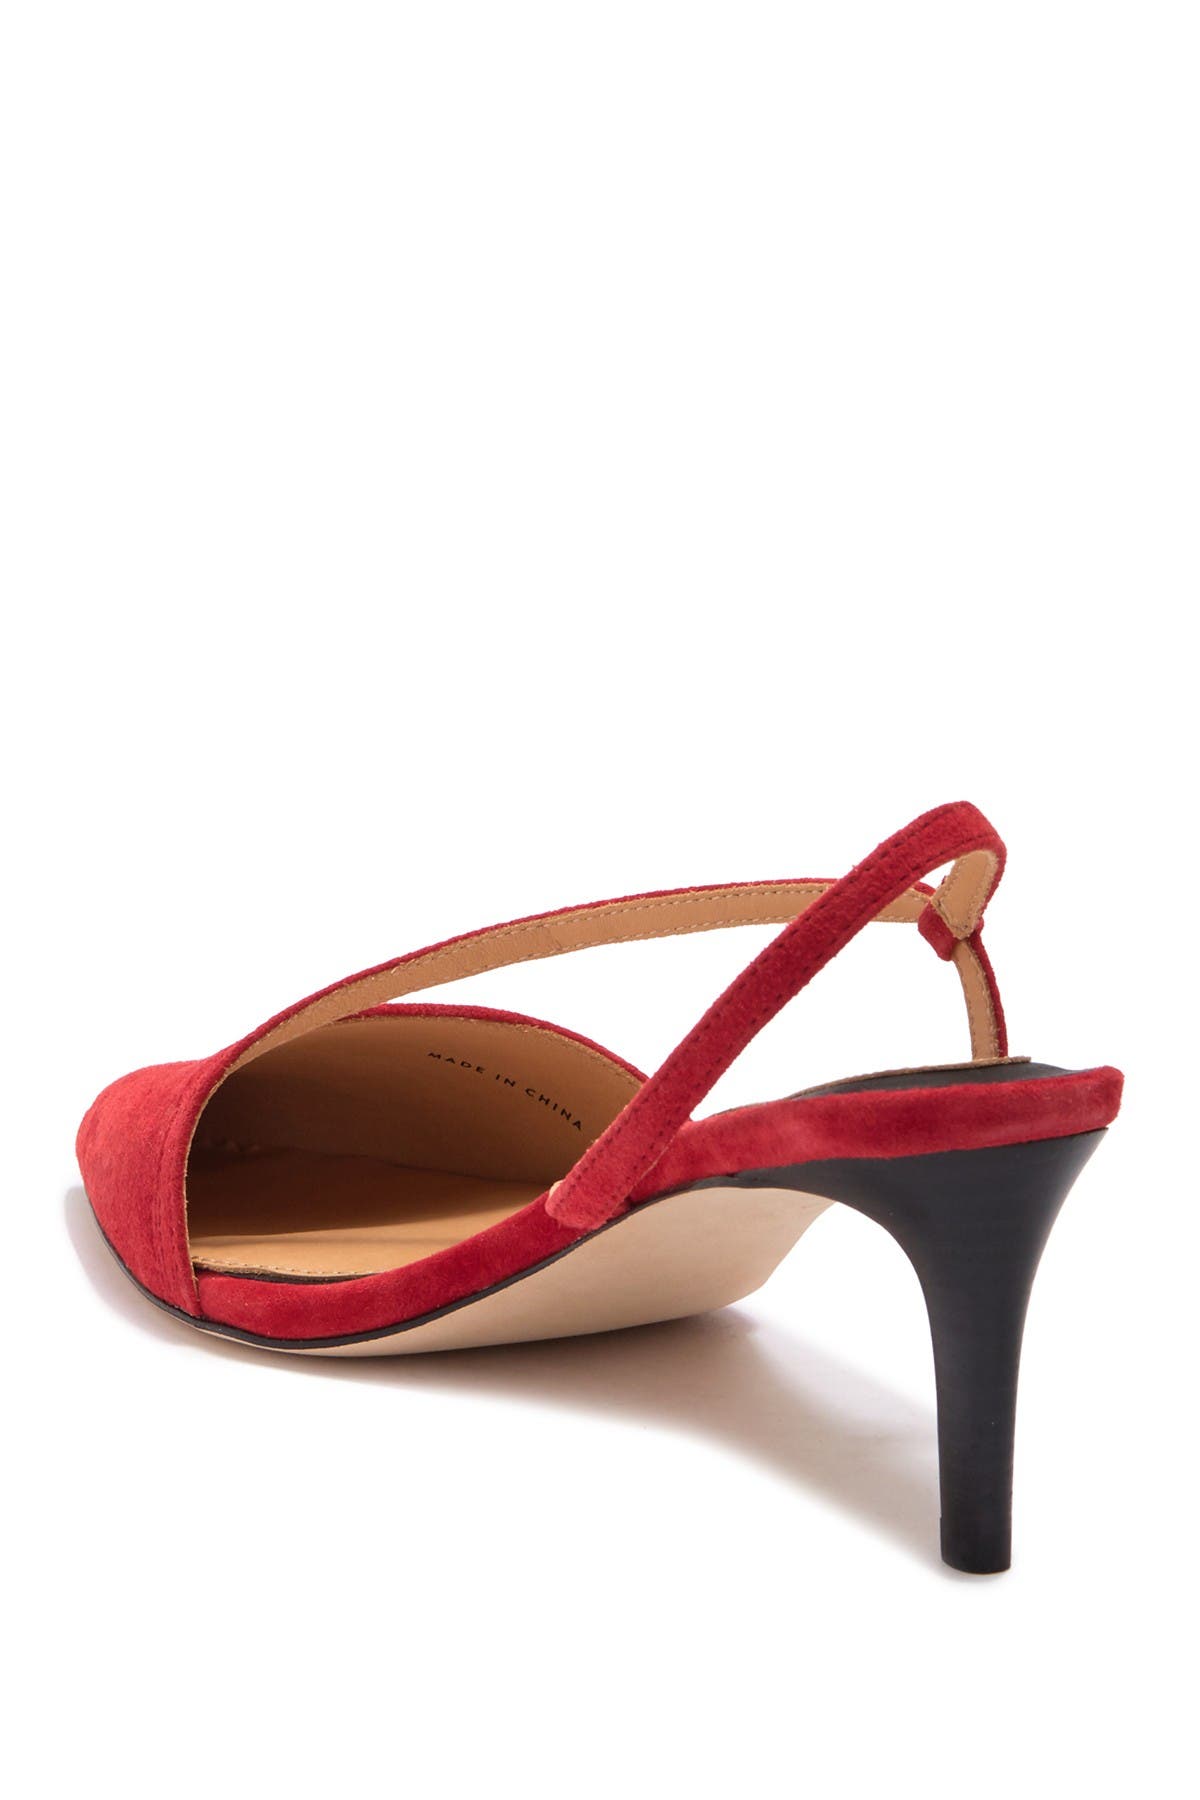 Joie Reno Slingback Pump In Red